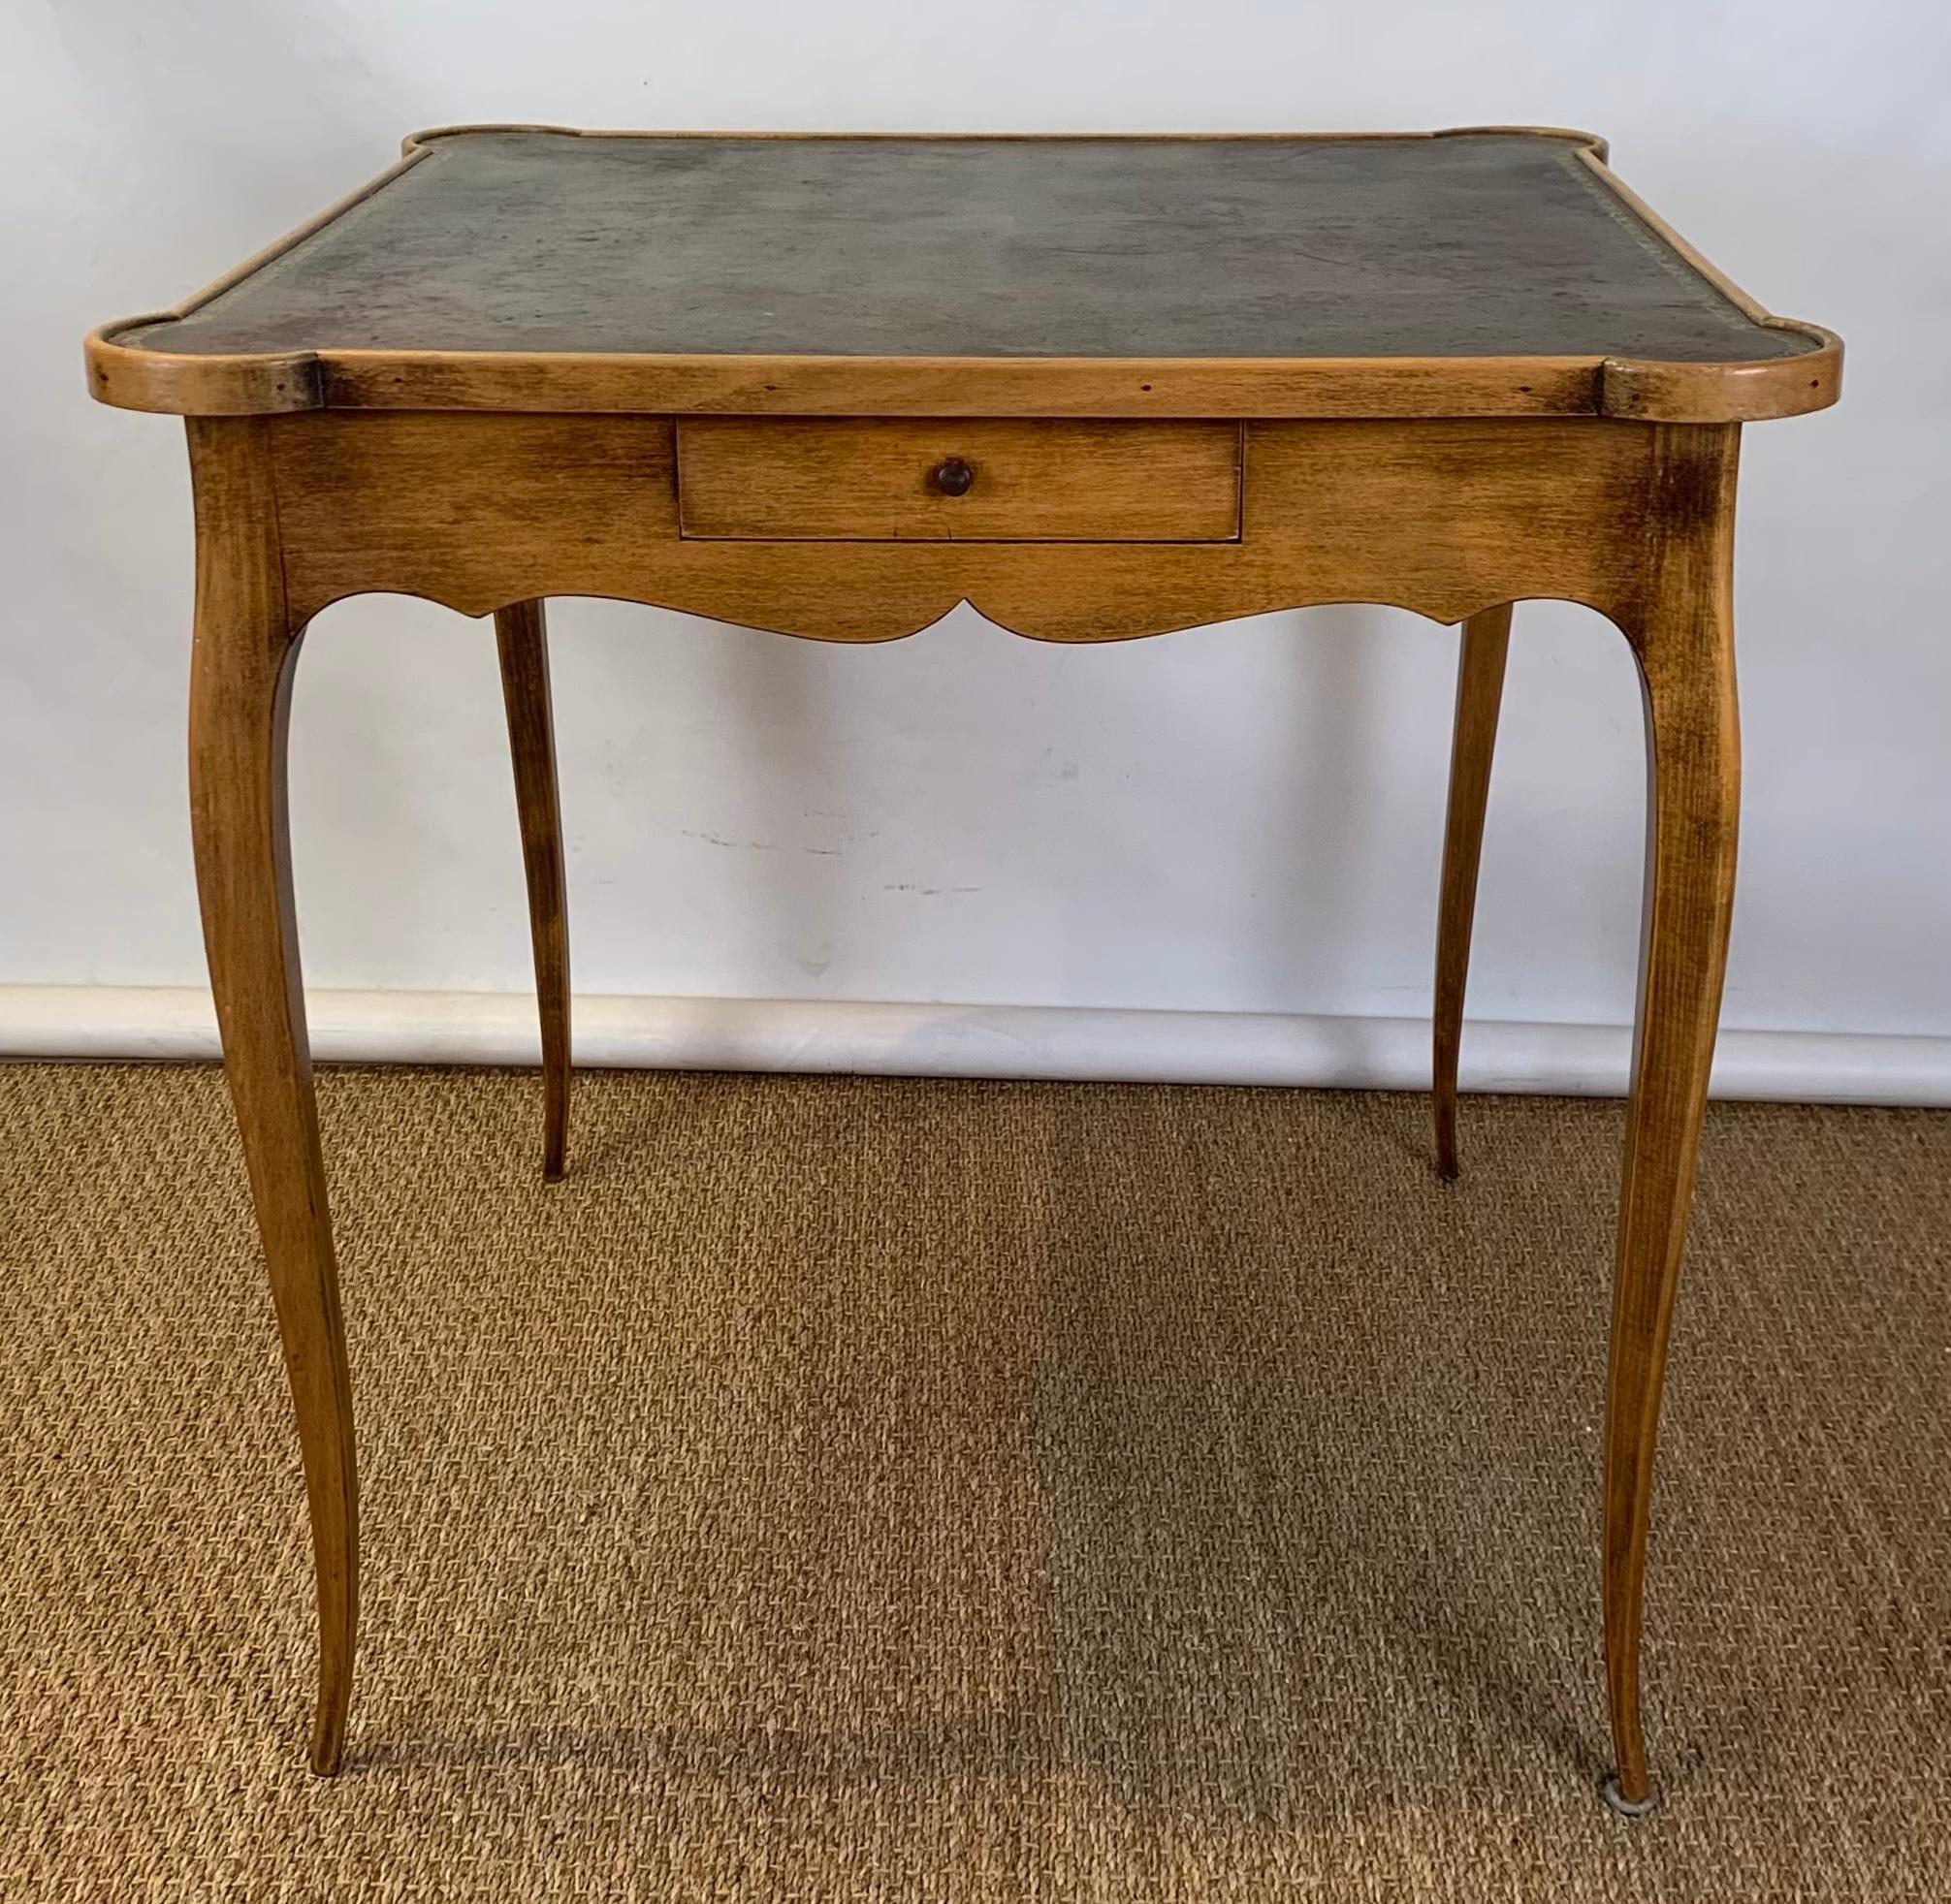 A small mid-20th century French style games table with tooled green-brown tooled leather top above single drawer resting on delicately carved legs.